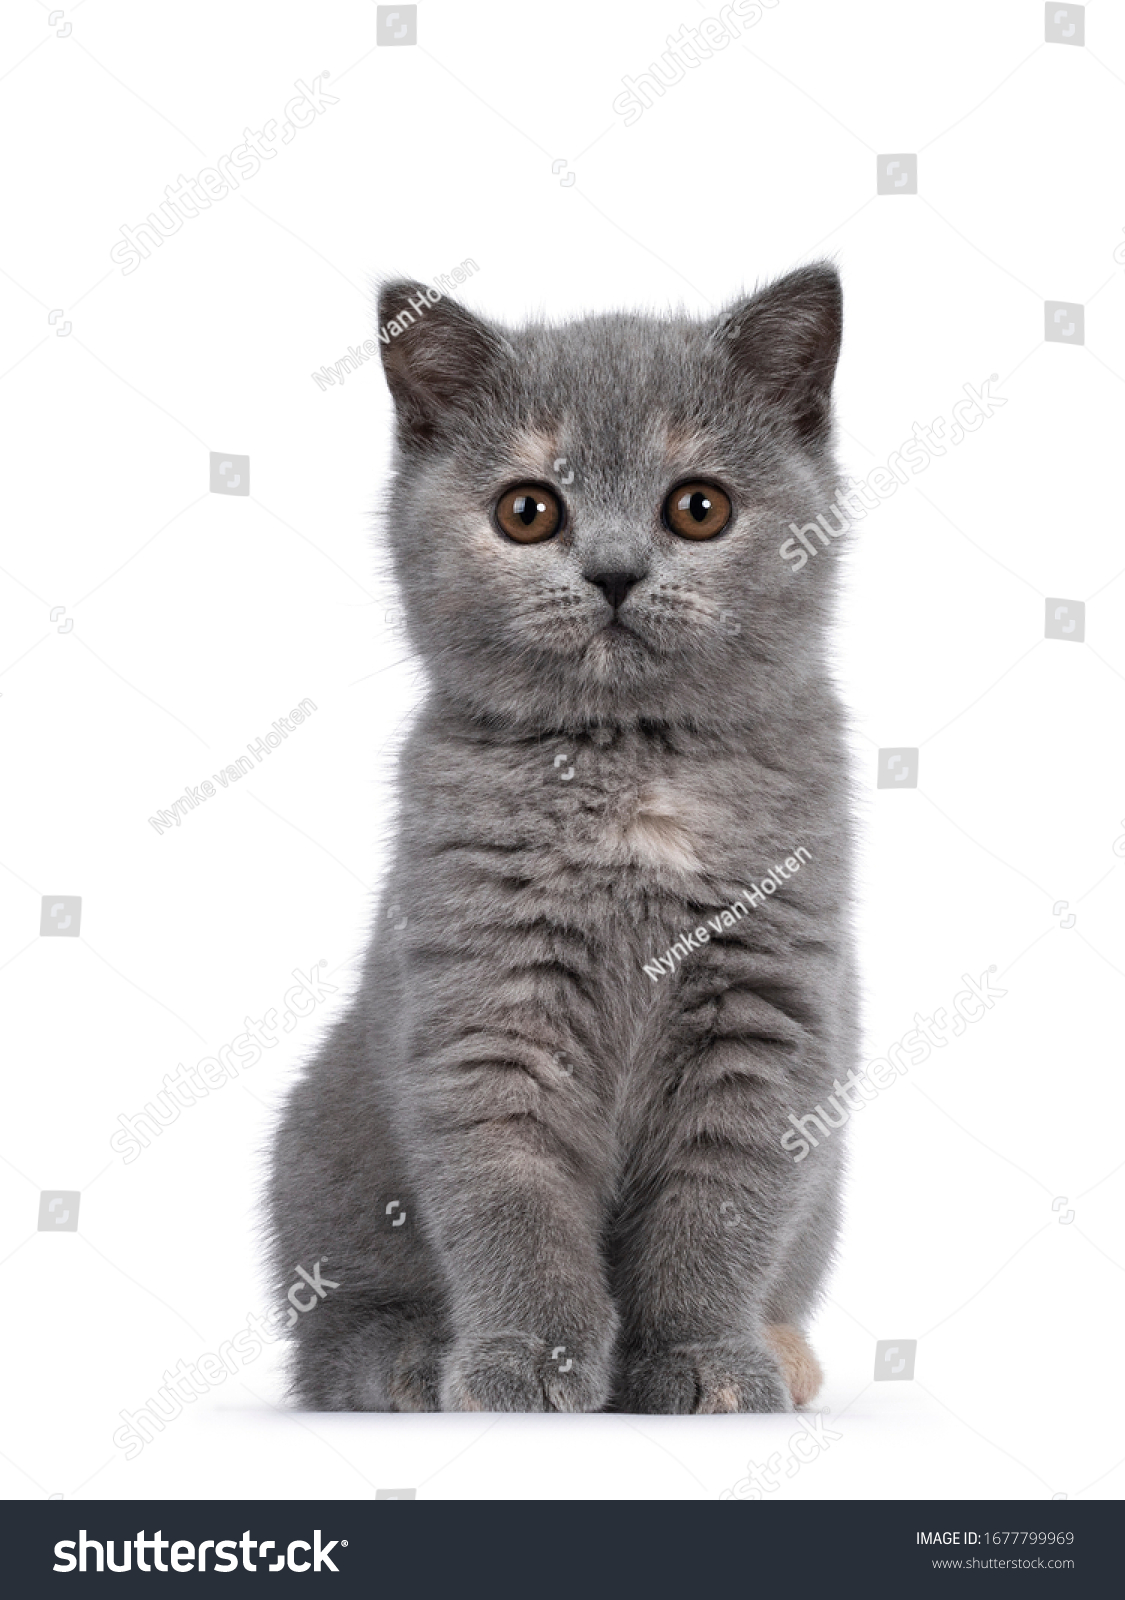 Cute blue tortie British Shorthair cat kitten, sitting proudly up facing front. Looking straight at camera with brown eyes. Isolated on white background. #1677799969